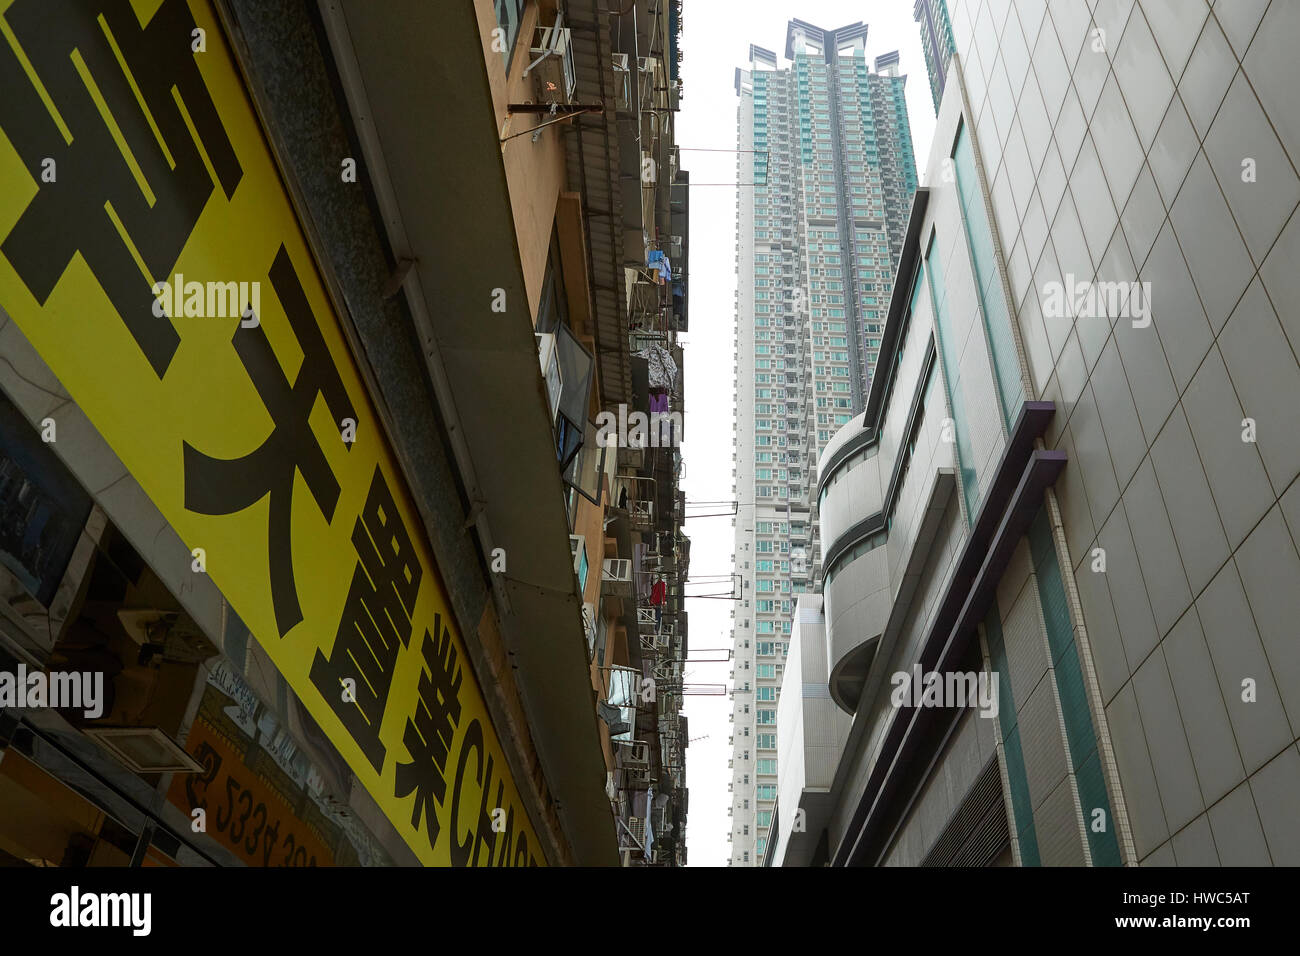 Contrasting Buildings In Kowloon City, Hong Kong. Stock Photo